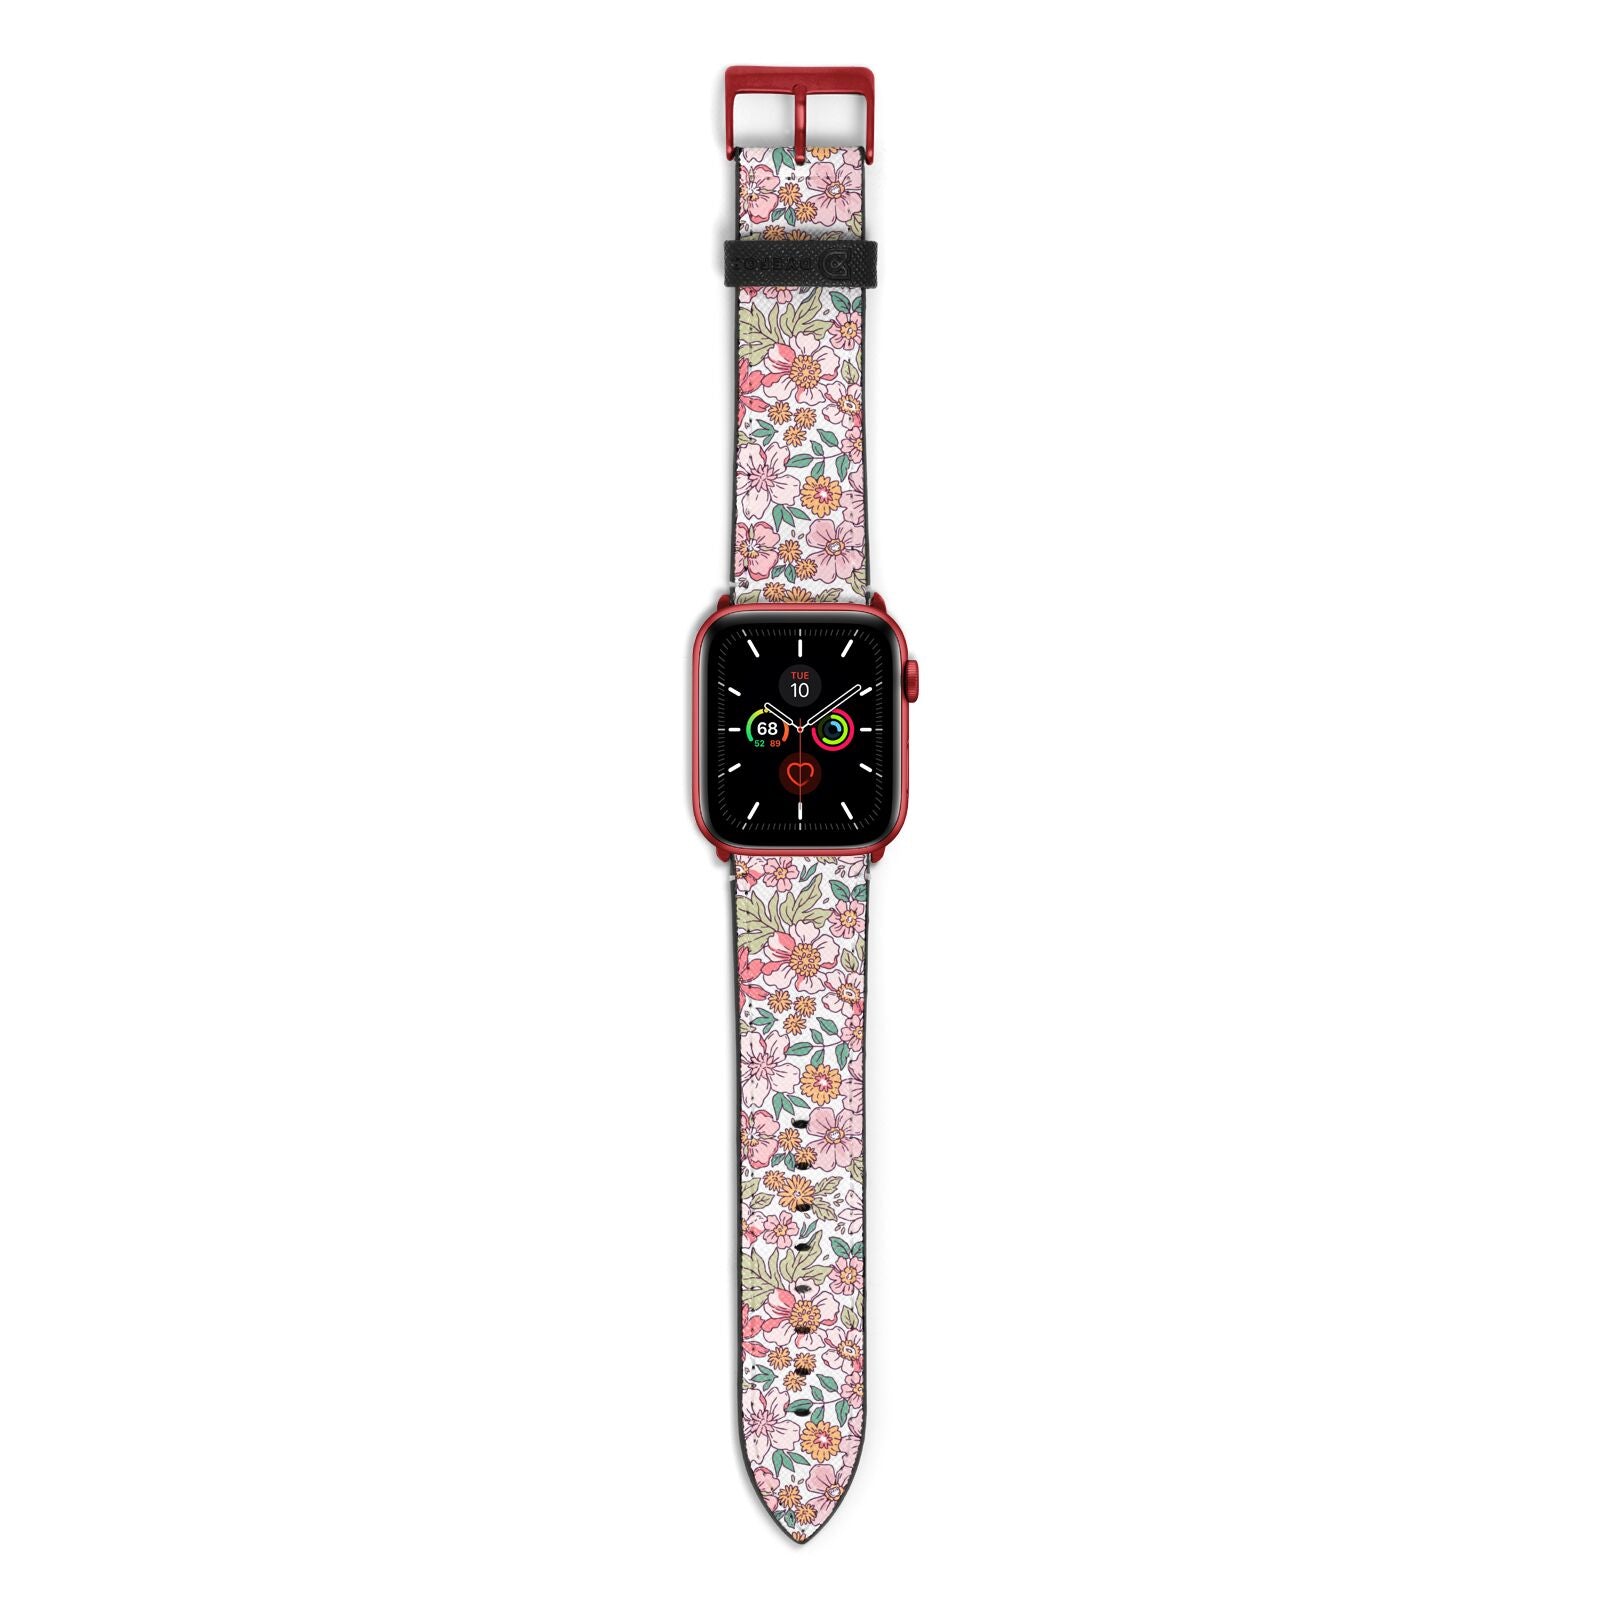 Small Floral Pattern Apple Watch Strap with Red Hardware